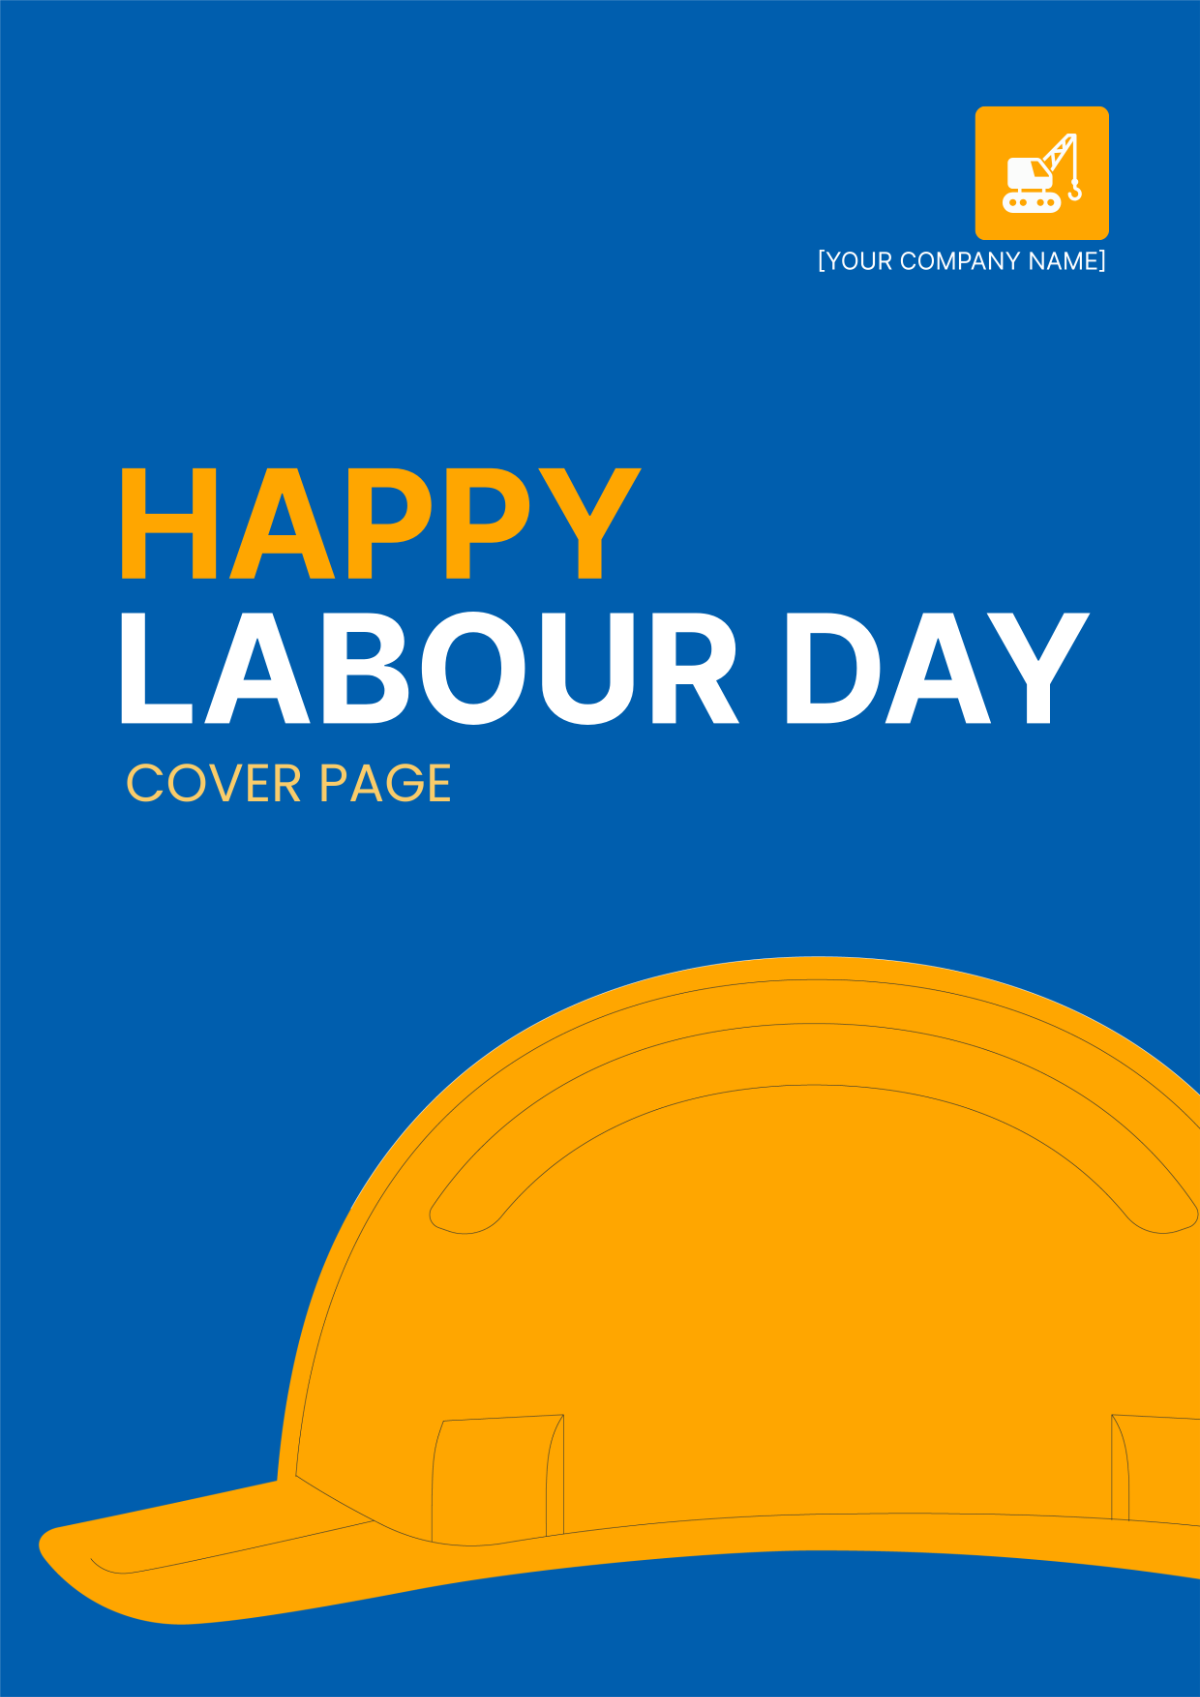 Happy Labour Day Cover Page